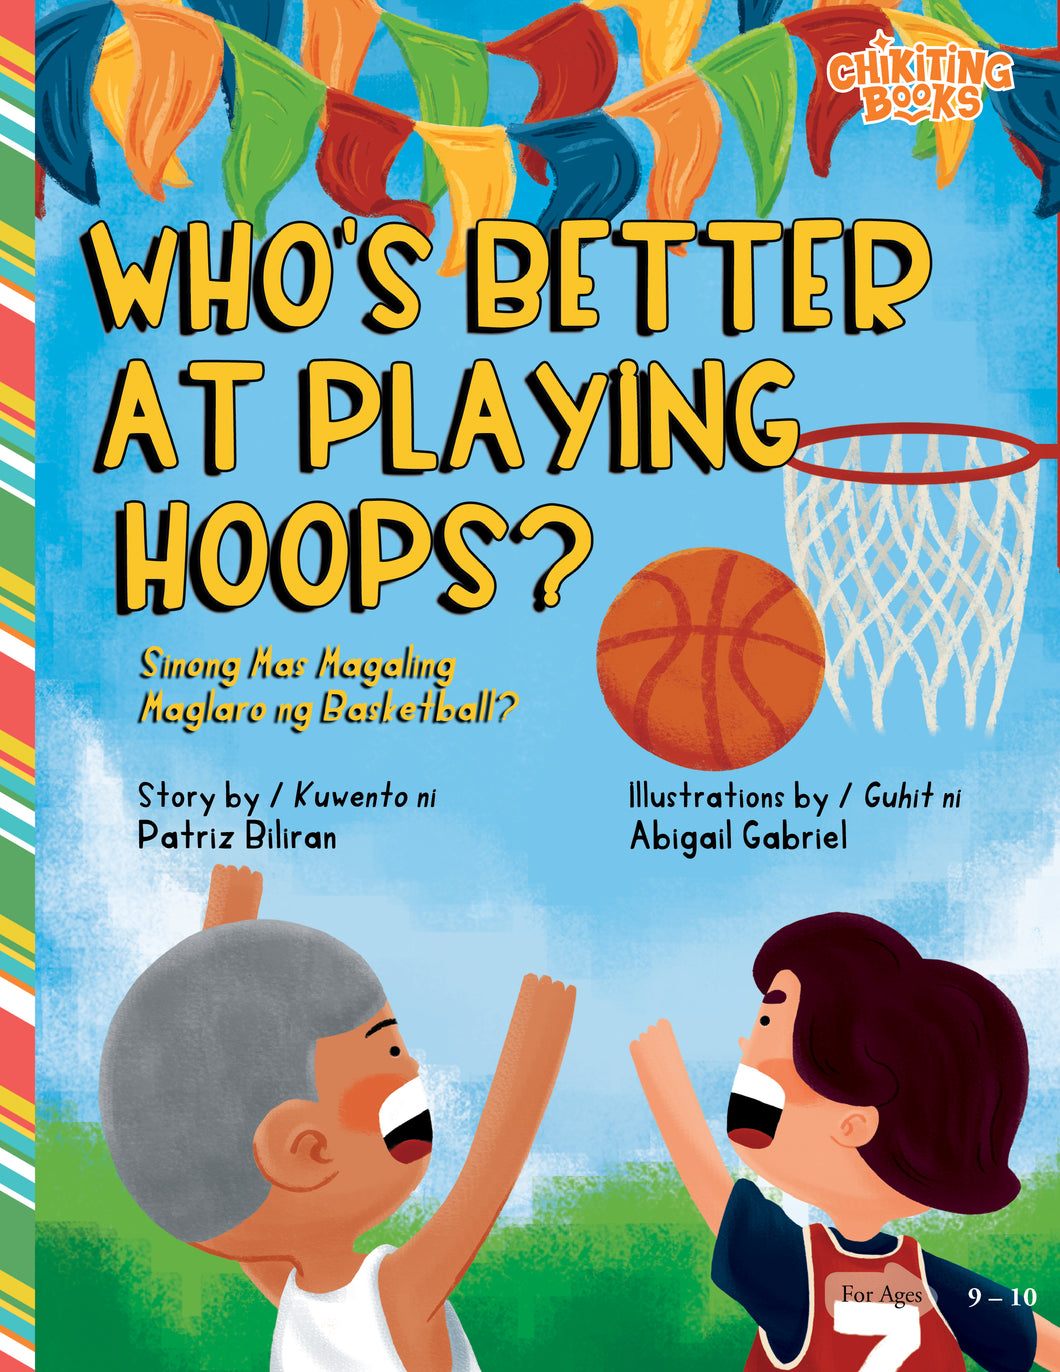 Who's Better at Playing Hoops?